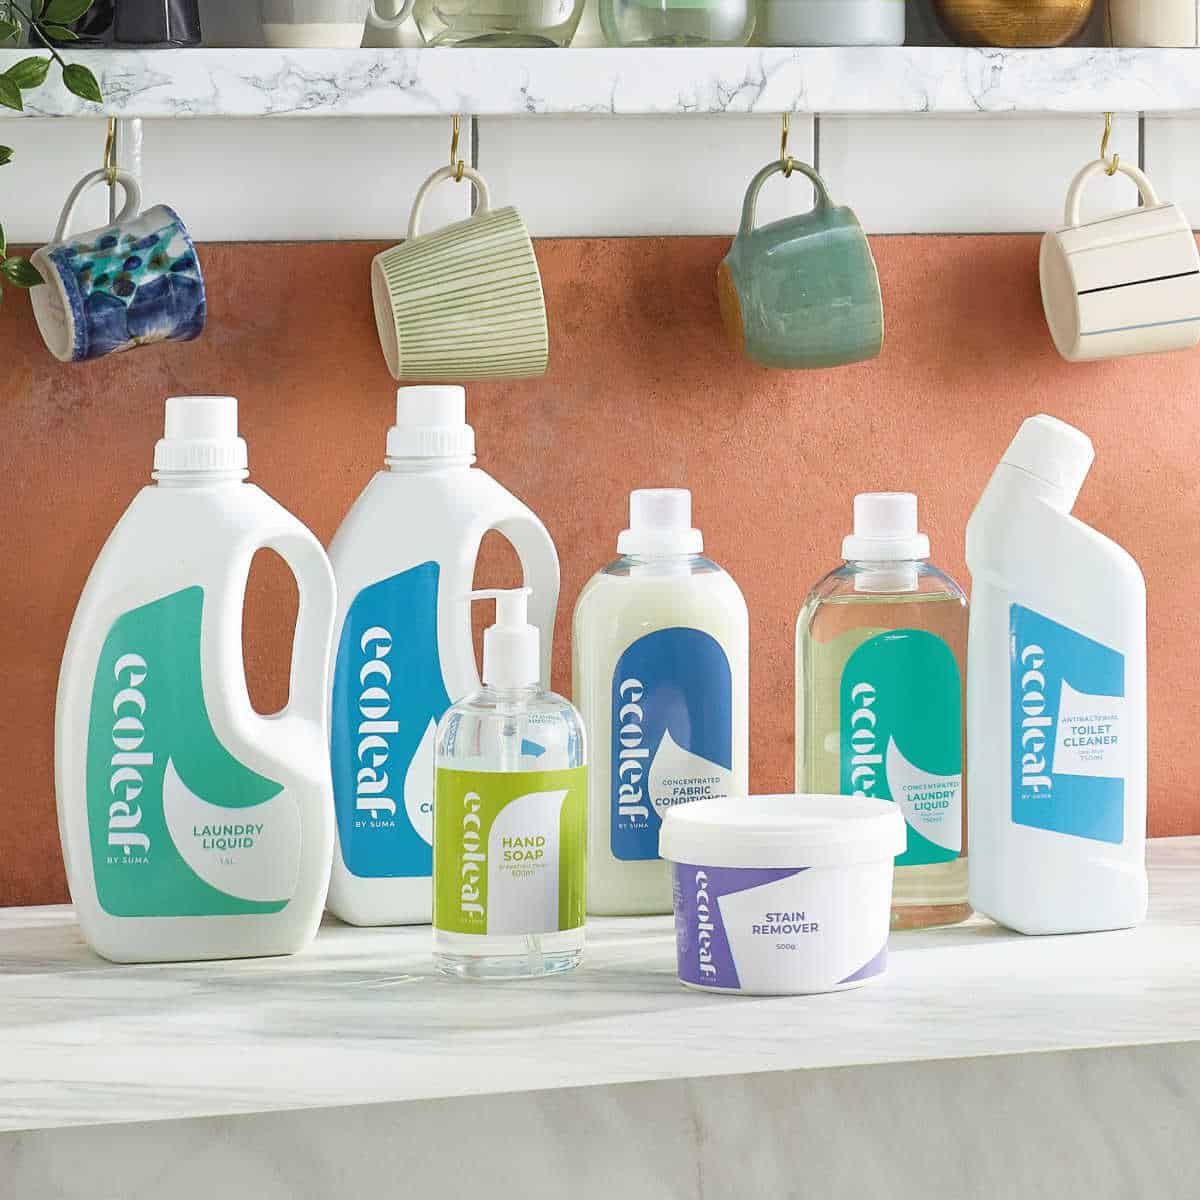 Selection of Eco-leaf eco-friendly cleaning products on a marble kitchen counter.